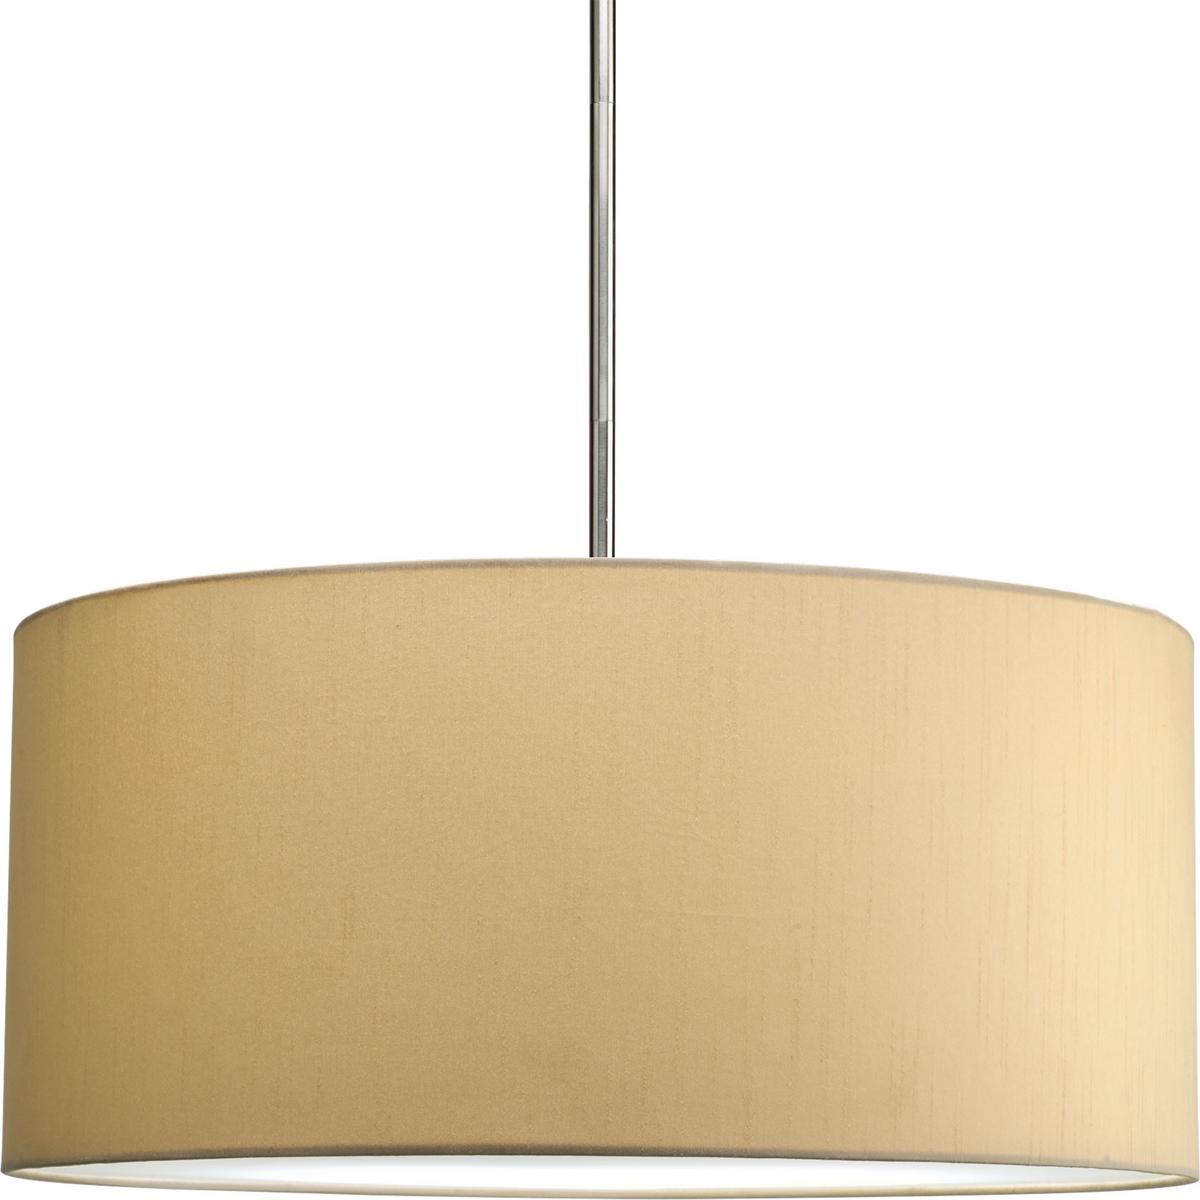 Hubbell P8825-01 The Markor Series is a modular pendant system. The versatile series allow the choice of shades and stem kits. This 22" shade with Beige Silken fabric is inspired by mid-century design. Acrylic bottom diffuser. This shade can be used with a variety of stem